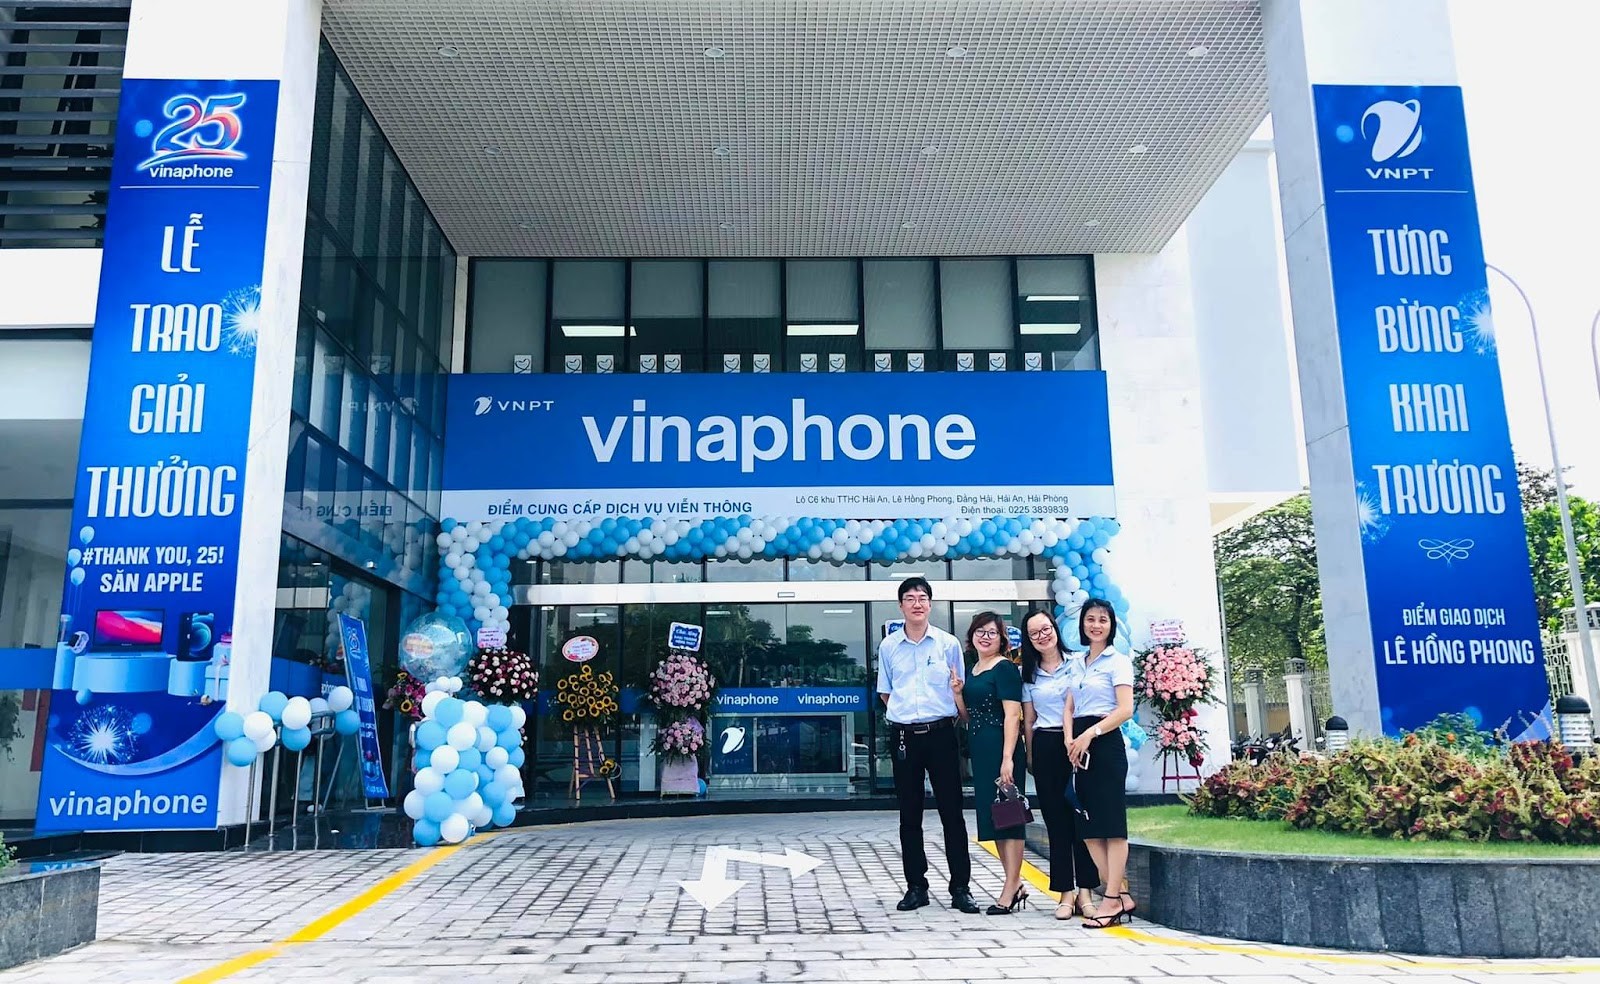 Another prominent telecom operator in Vietnam